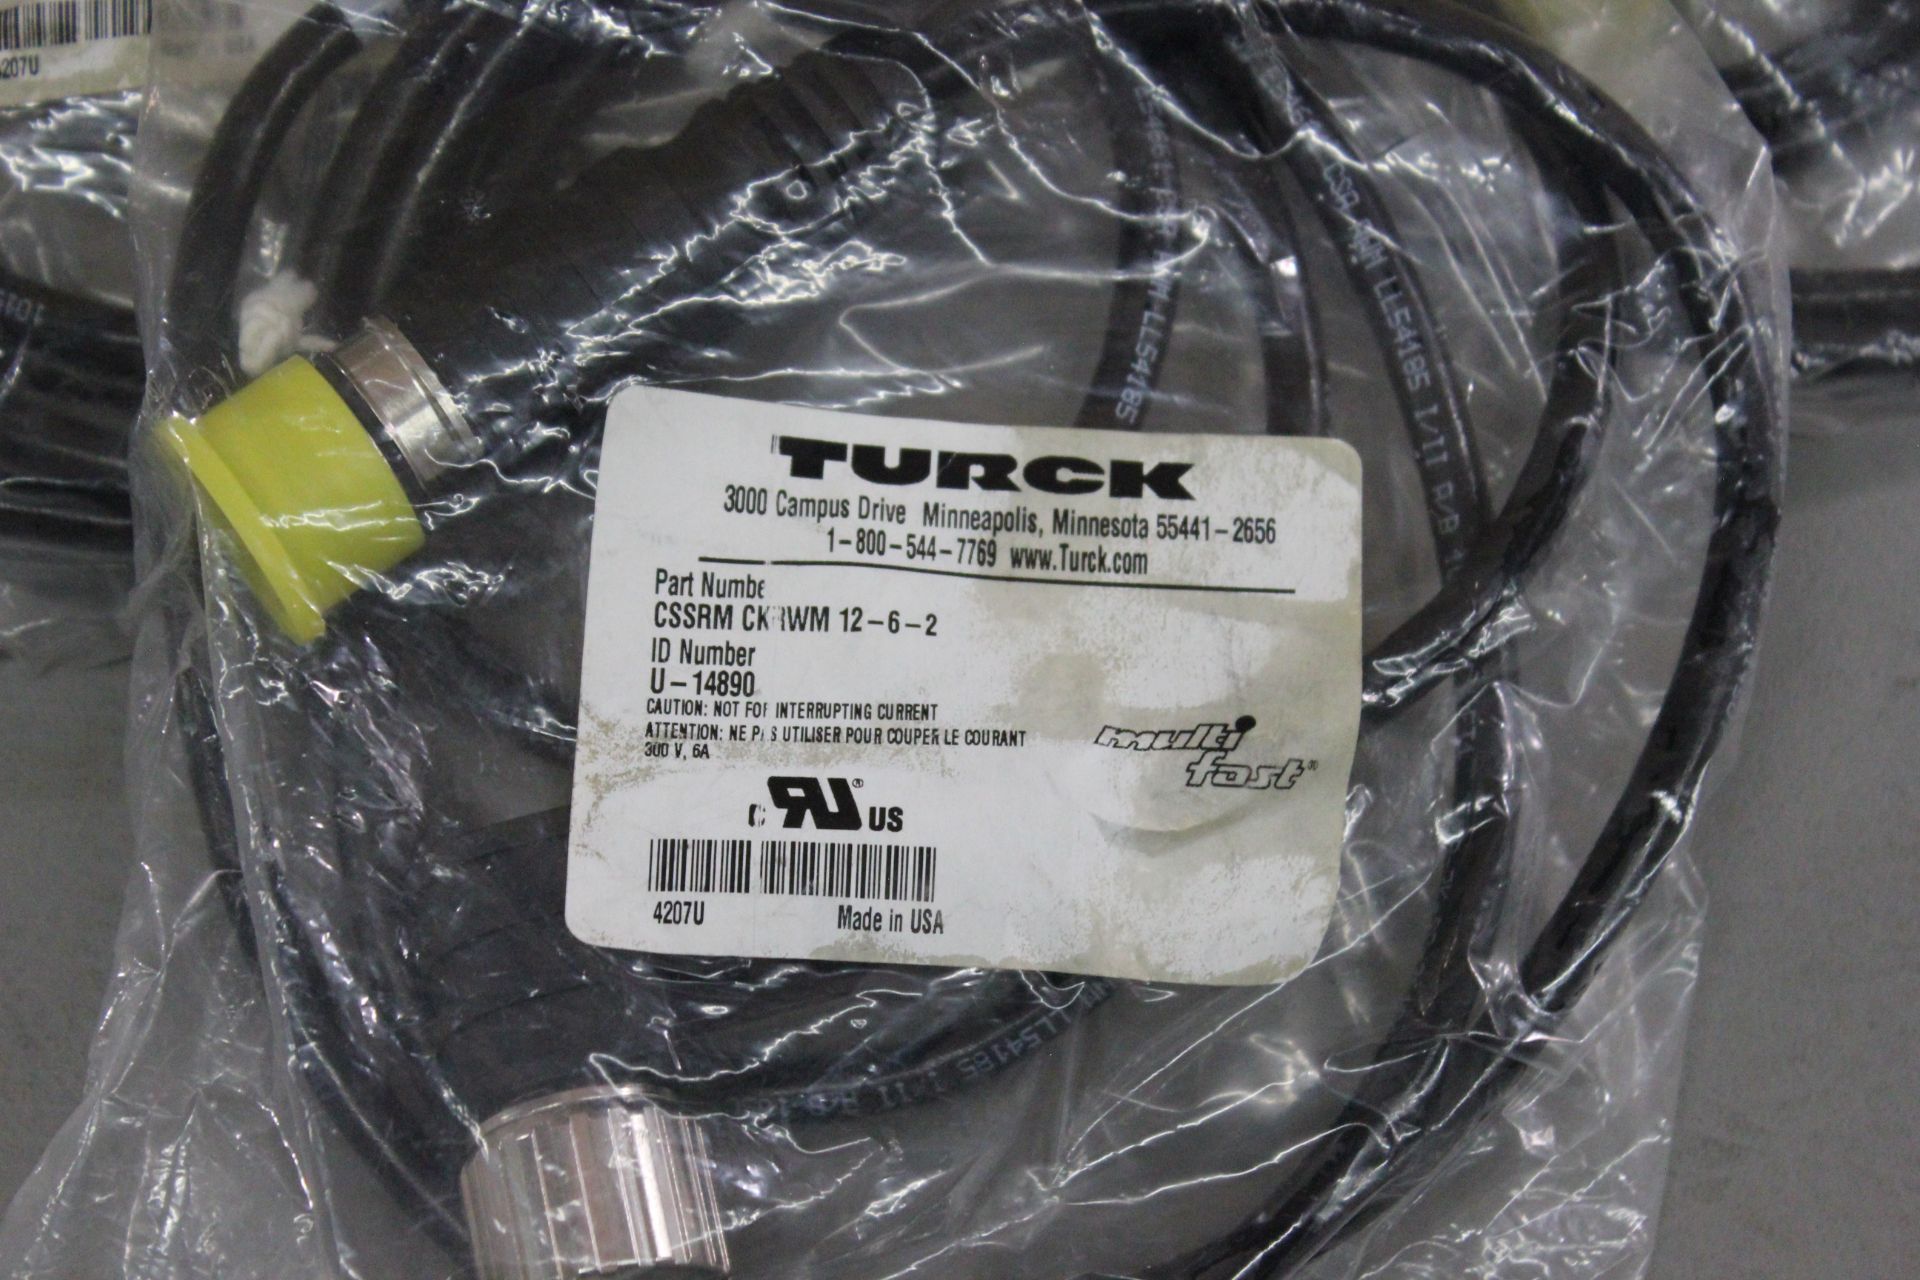 LOT OF NEW TURCK CABLES - Image 2 of 3